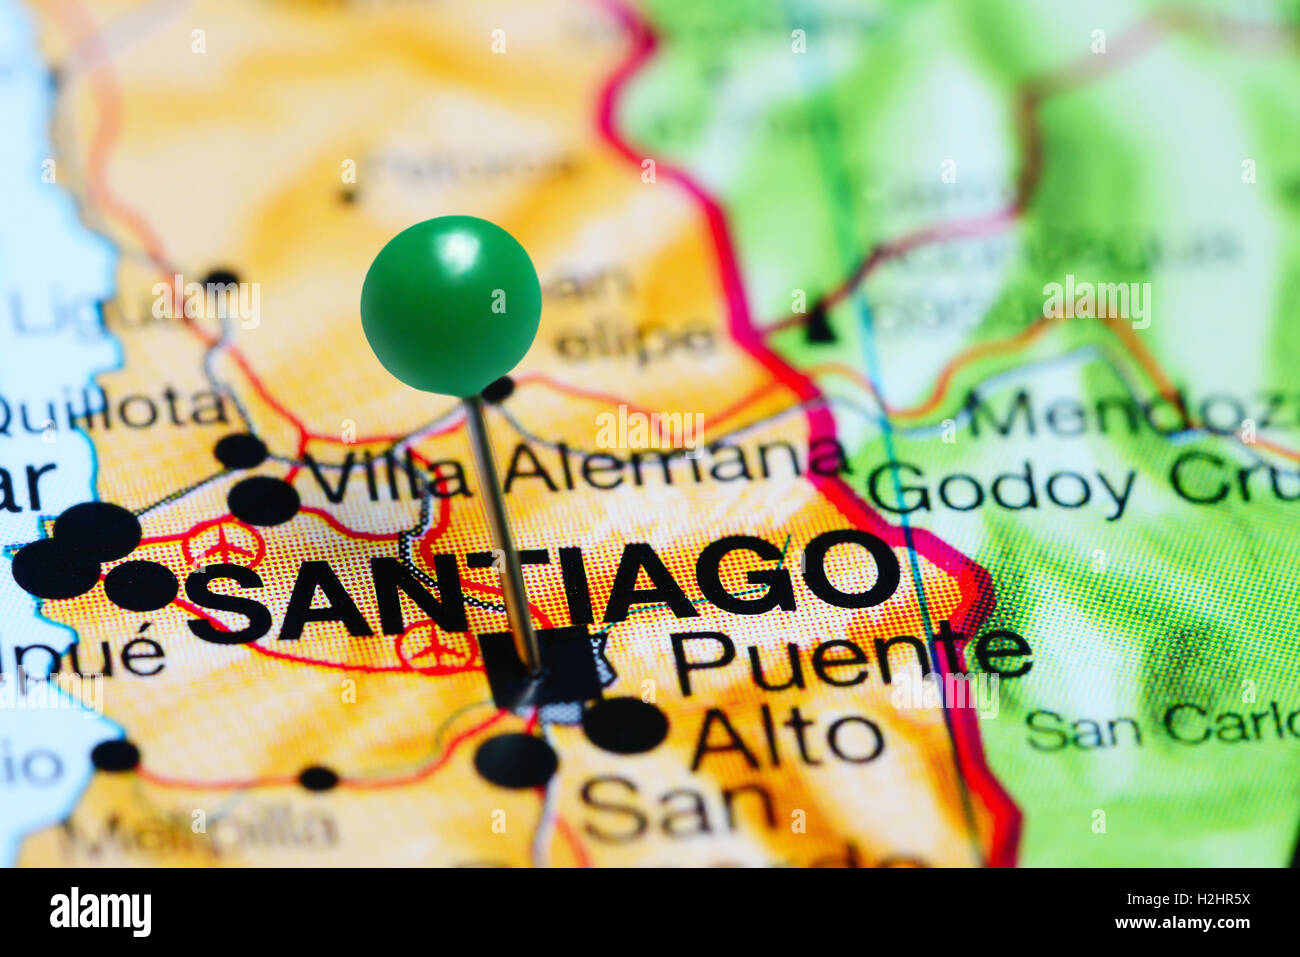 Santiago pinned on a map of Chile Stock Photo